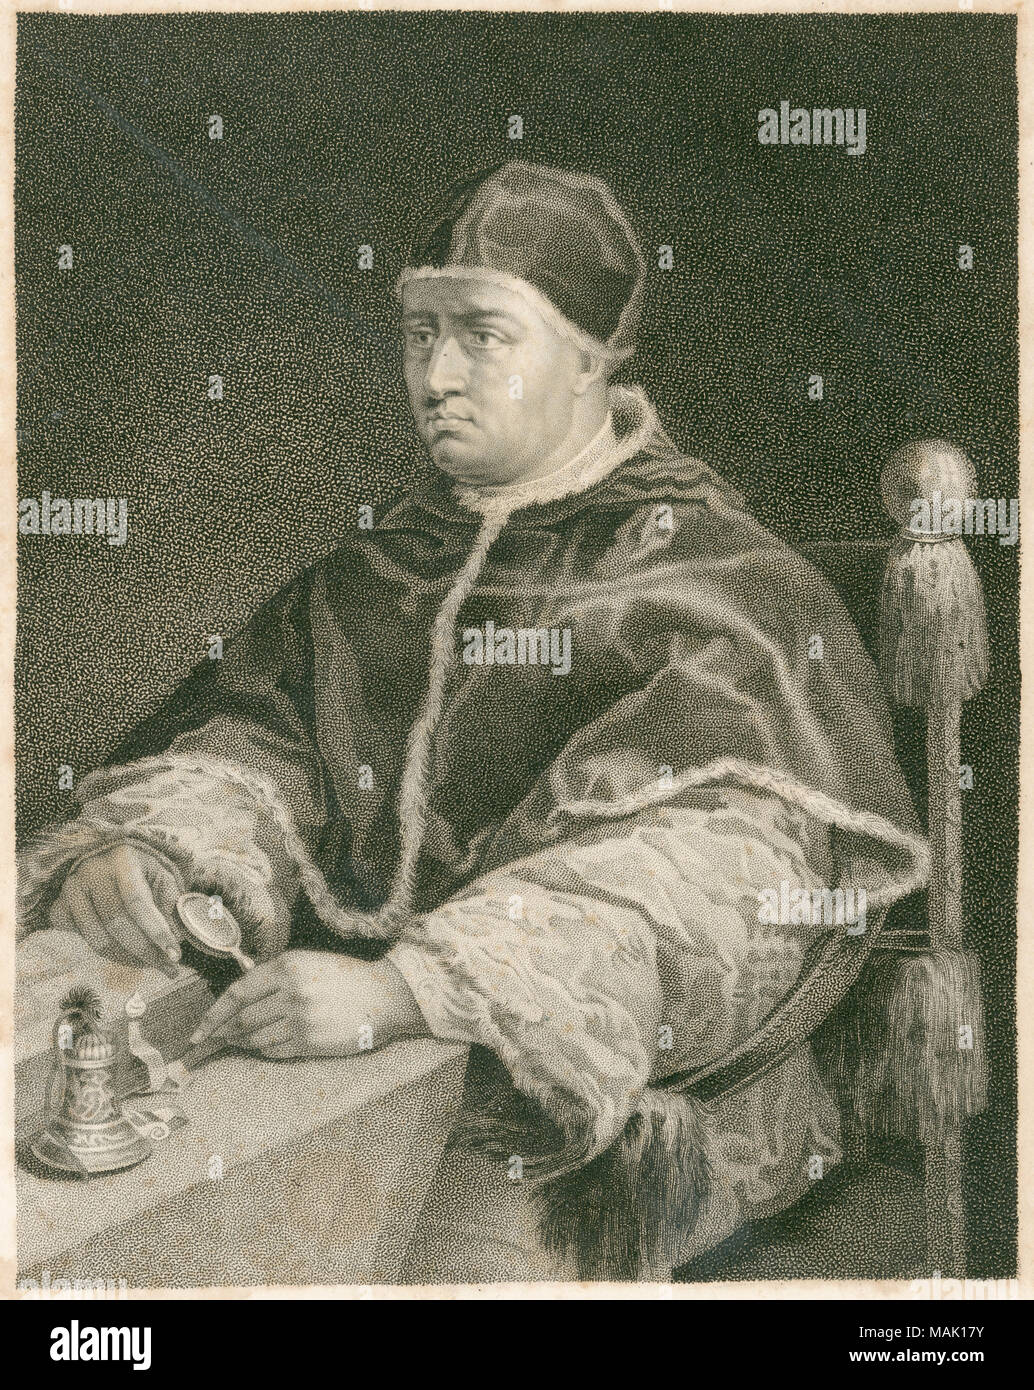 Antique c1820 engraving, Pope Leo X. Pope Leo X (1475-1521), born Giovanni di Lorenzo de' Medici, was Pope from 9 March 1513 to his death in 1521. SOURCE: ORIGINAL ENGRAVING portrait; steel, engraving; engraved; antique; old; art; print; illustration; historic, historical, archival, archive, b&w, black and white, 1860s, 1870s, 1800s, nineteenth century; 19th century Stock Photo